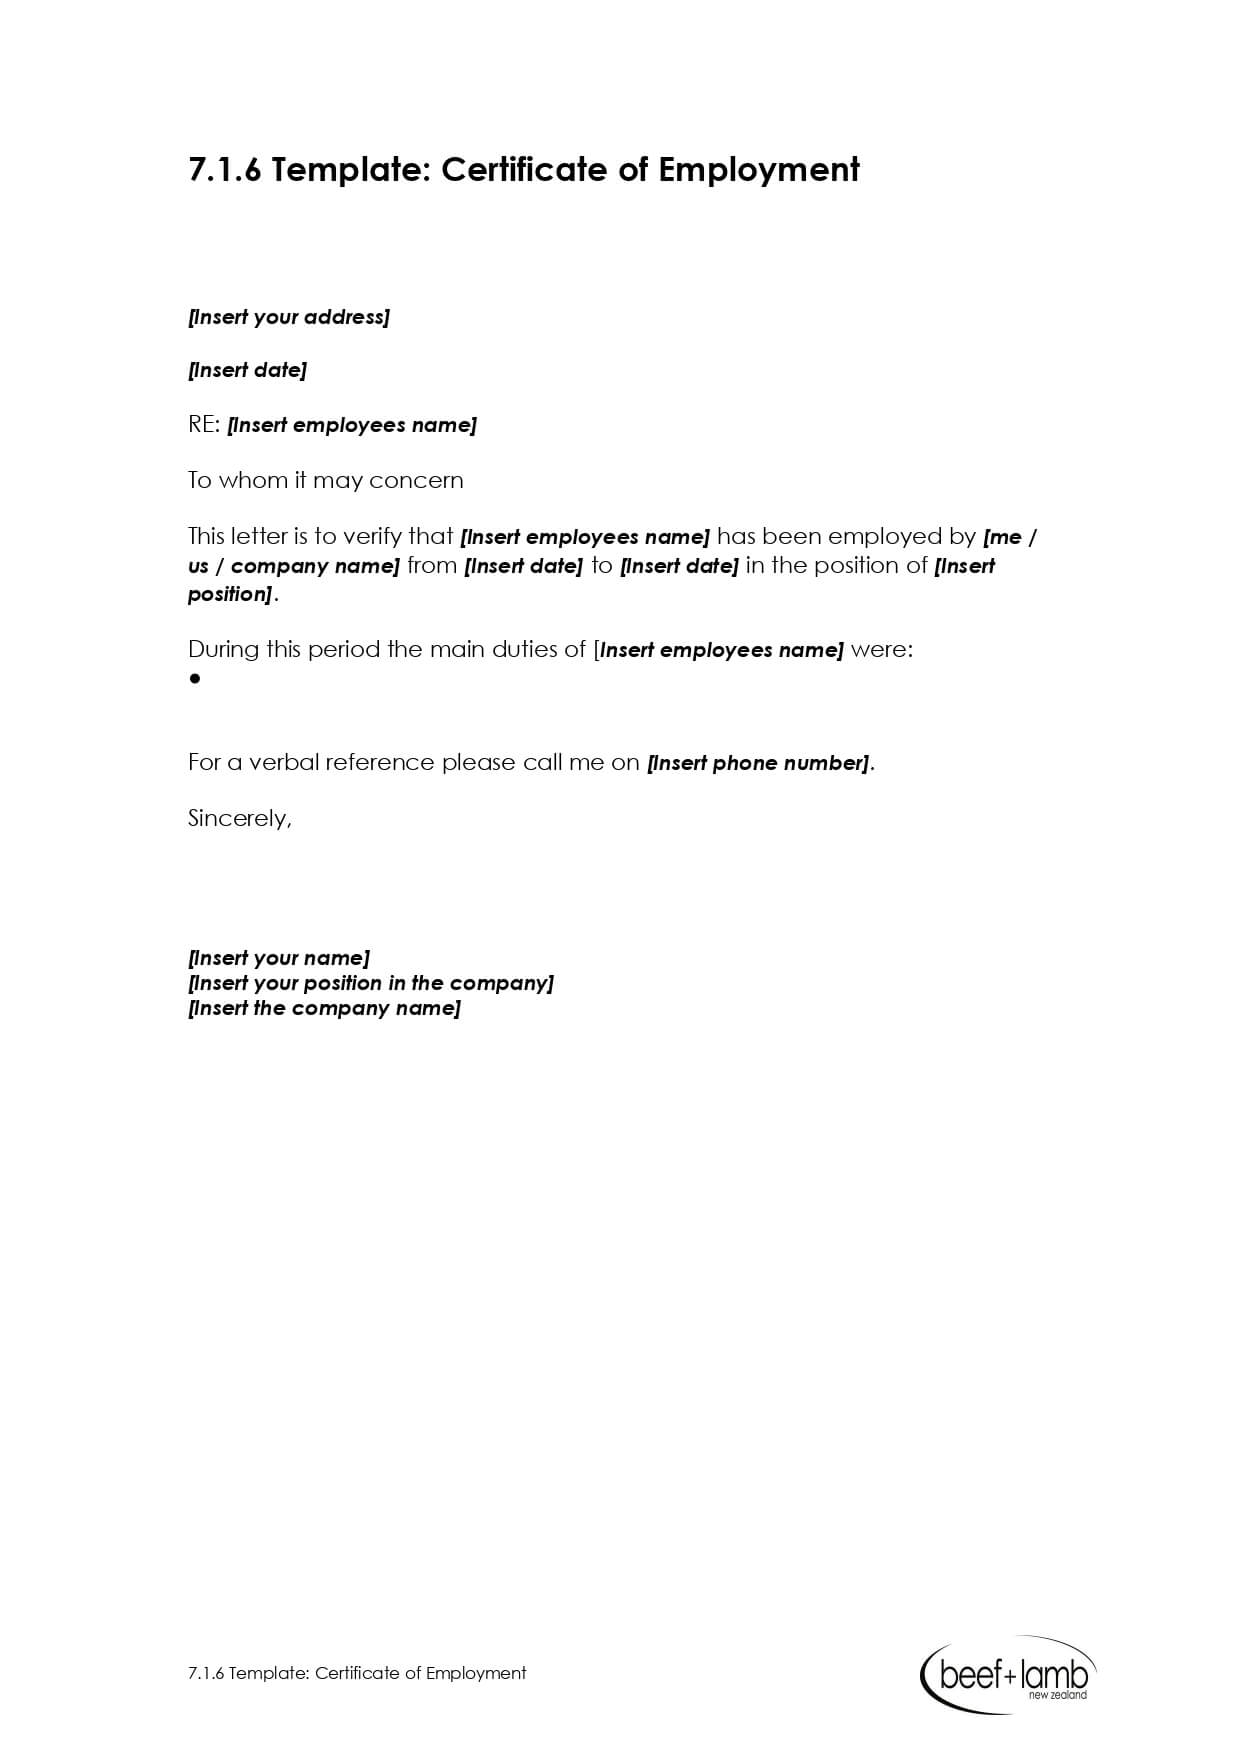 Editable Certificate Of Employment Template – Google Docs For Template Of Certificate Of Employment